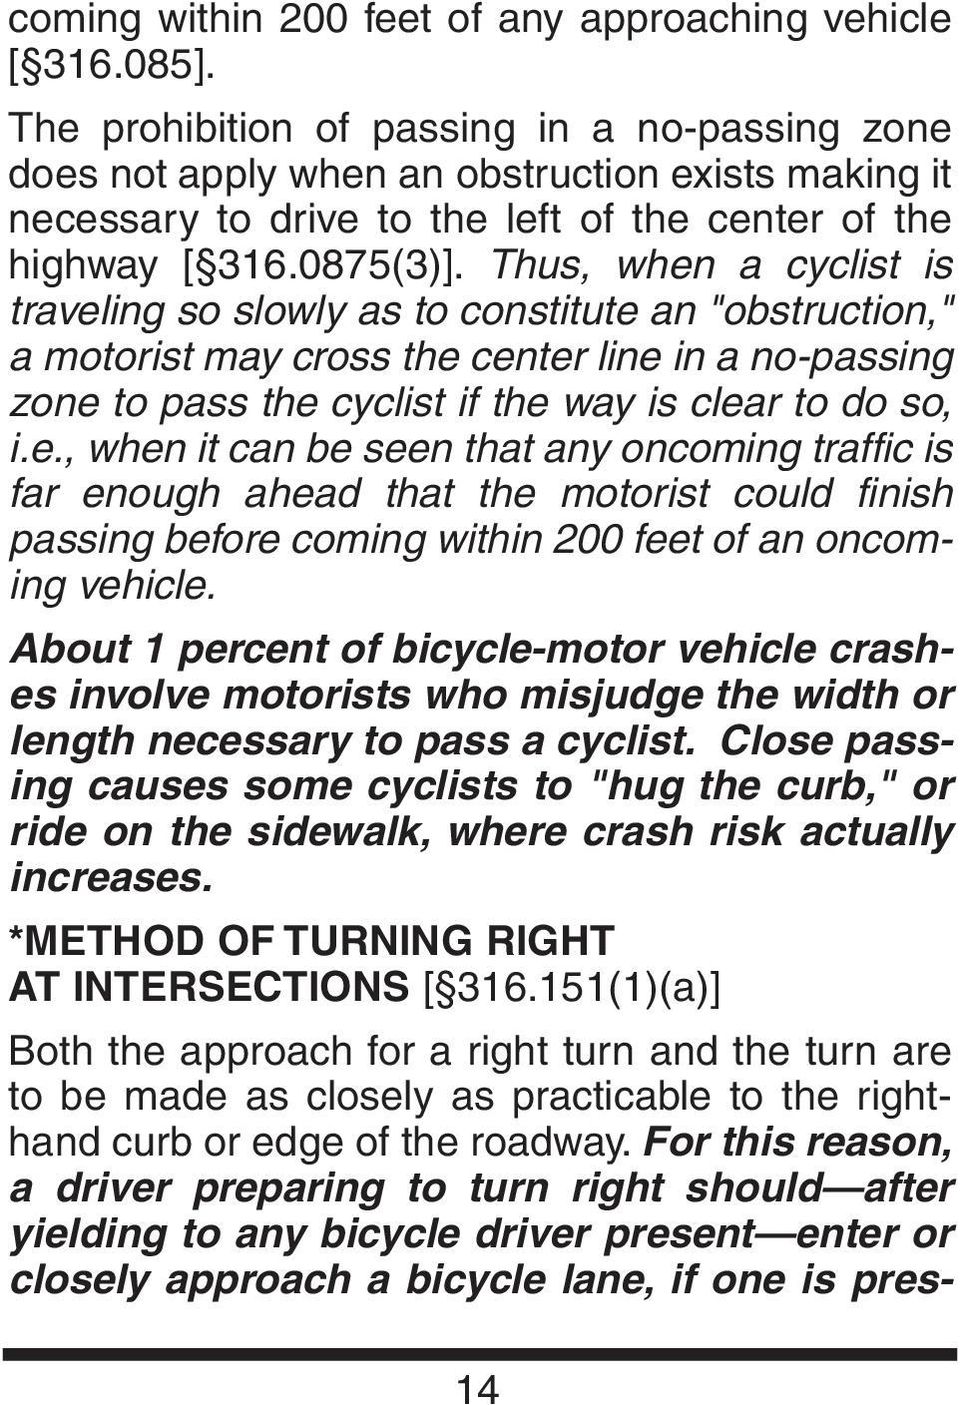 Thus, when a cyclist is traveling so slowly as to constitute an "obstruction," a motorist may cross the center line in a no-passing zone to pass the cyclist if the way is clear to do so, i.e., when it can be seen that any oncoming traffic is far enough ahead that the motorist could finish passing before coming within 200 feet of an oncoming vehicle.